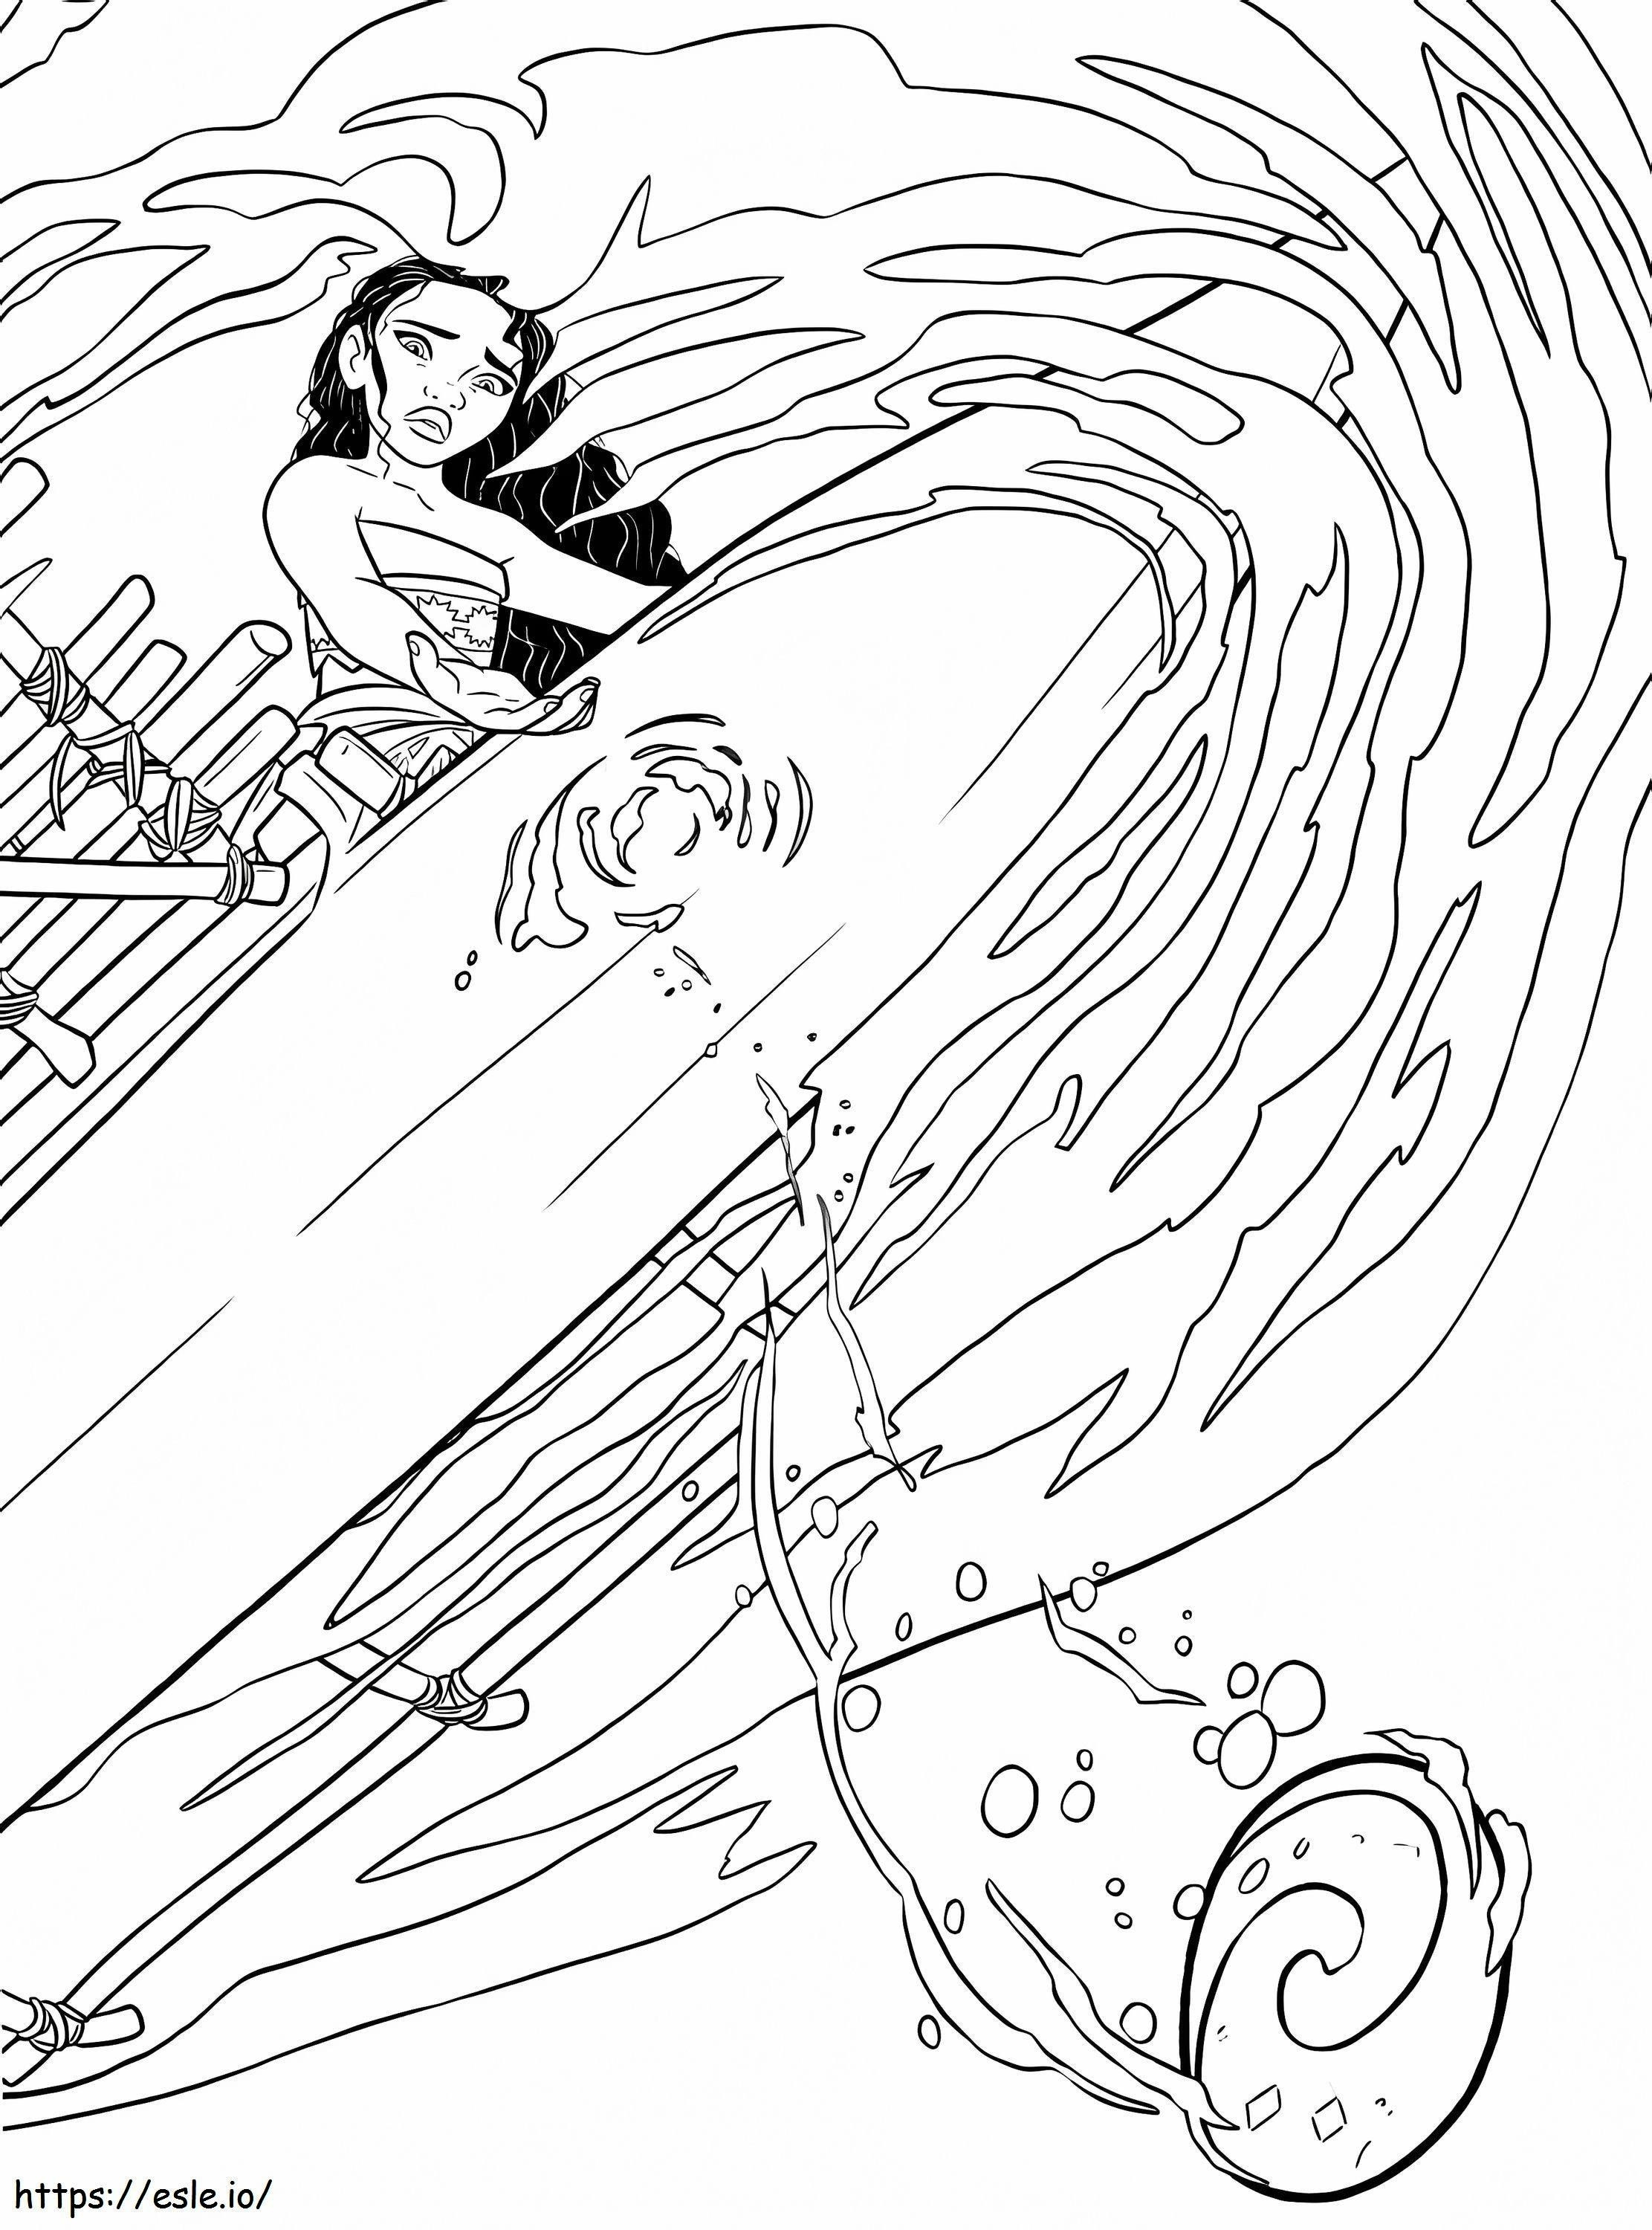 Moana Is Sad coloring page